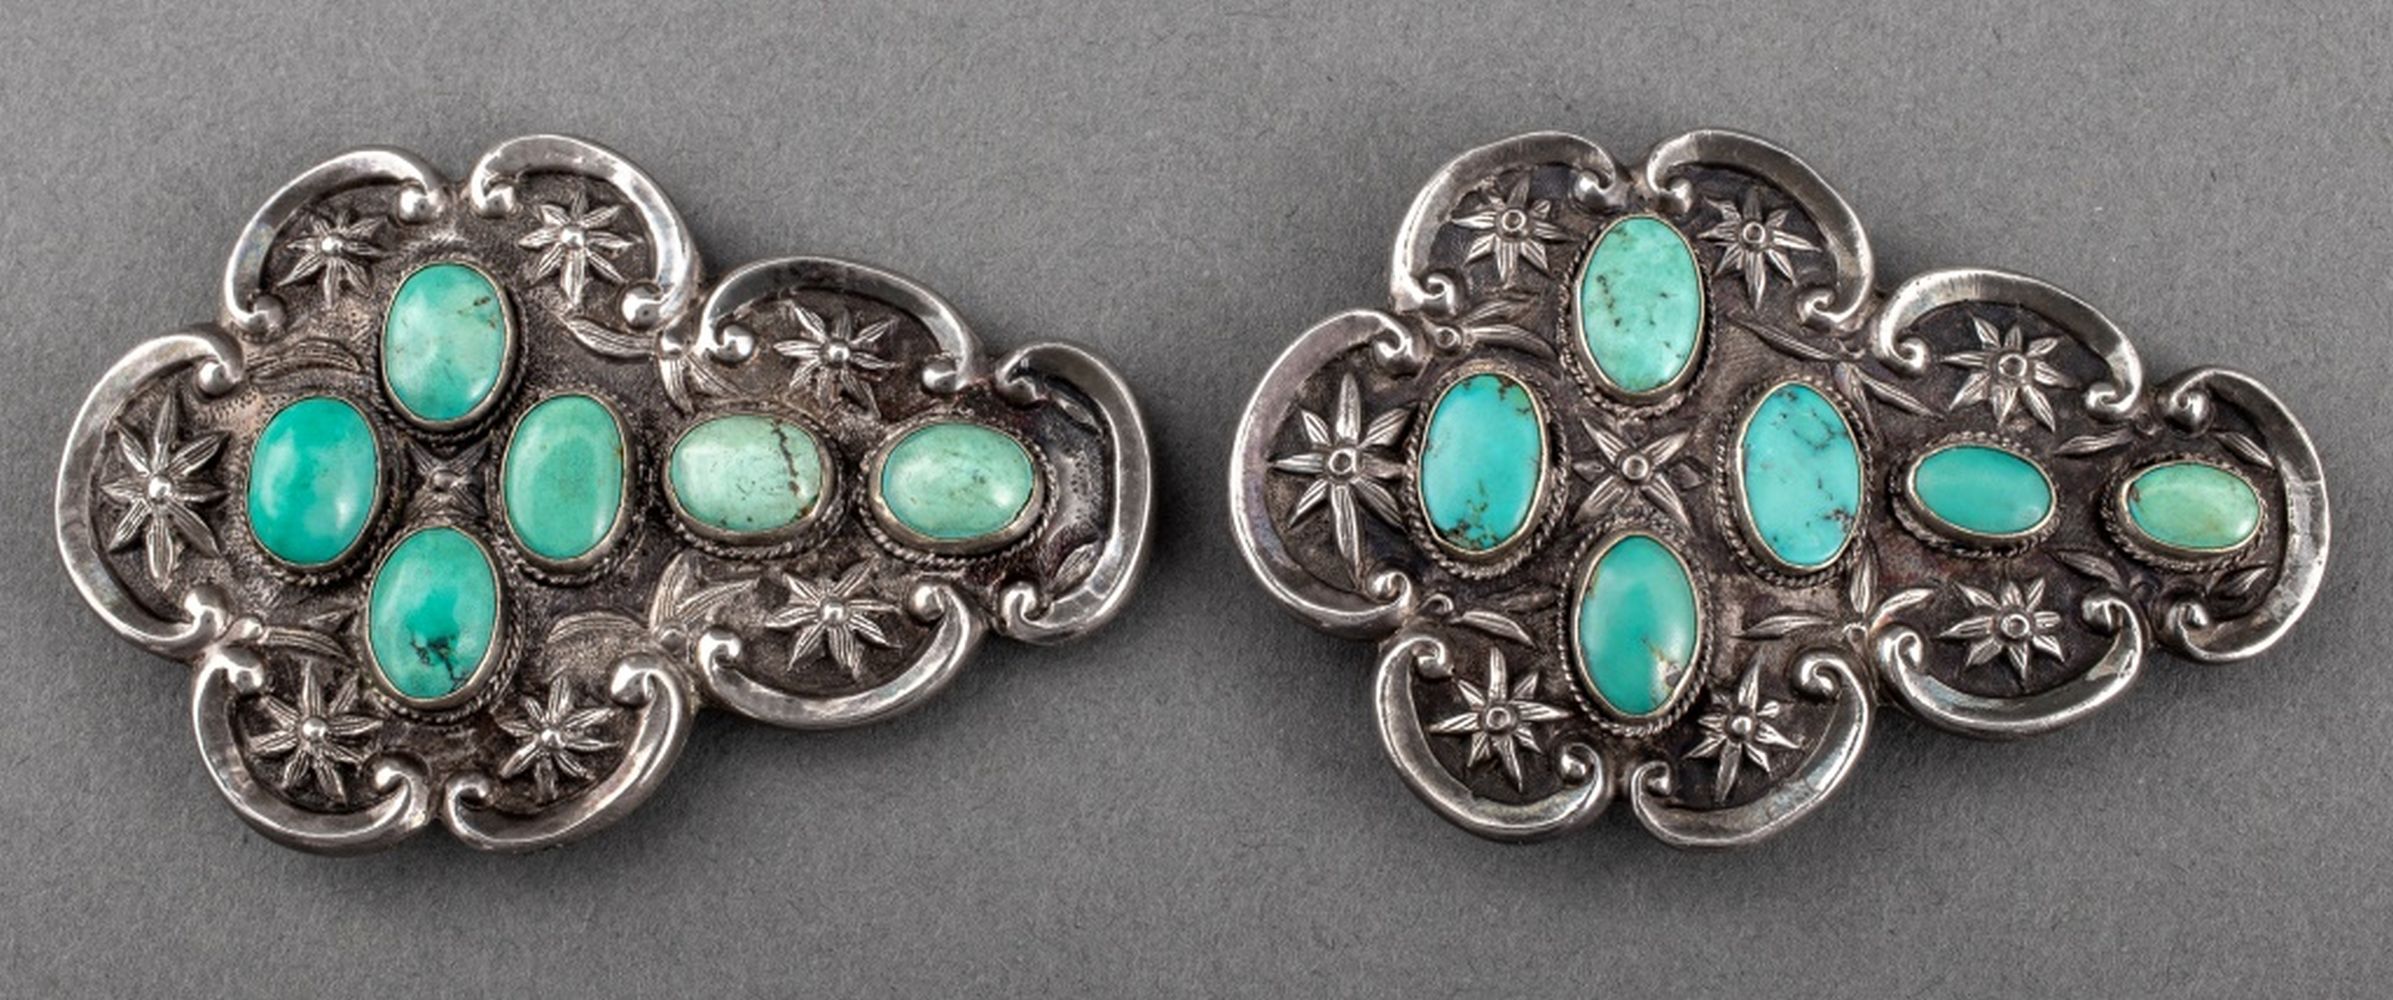 CHINESE SILVER & TURQUOISE BUCKLES,